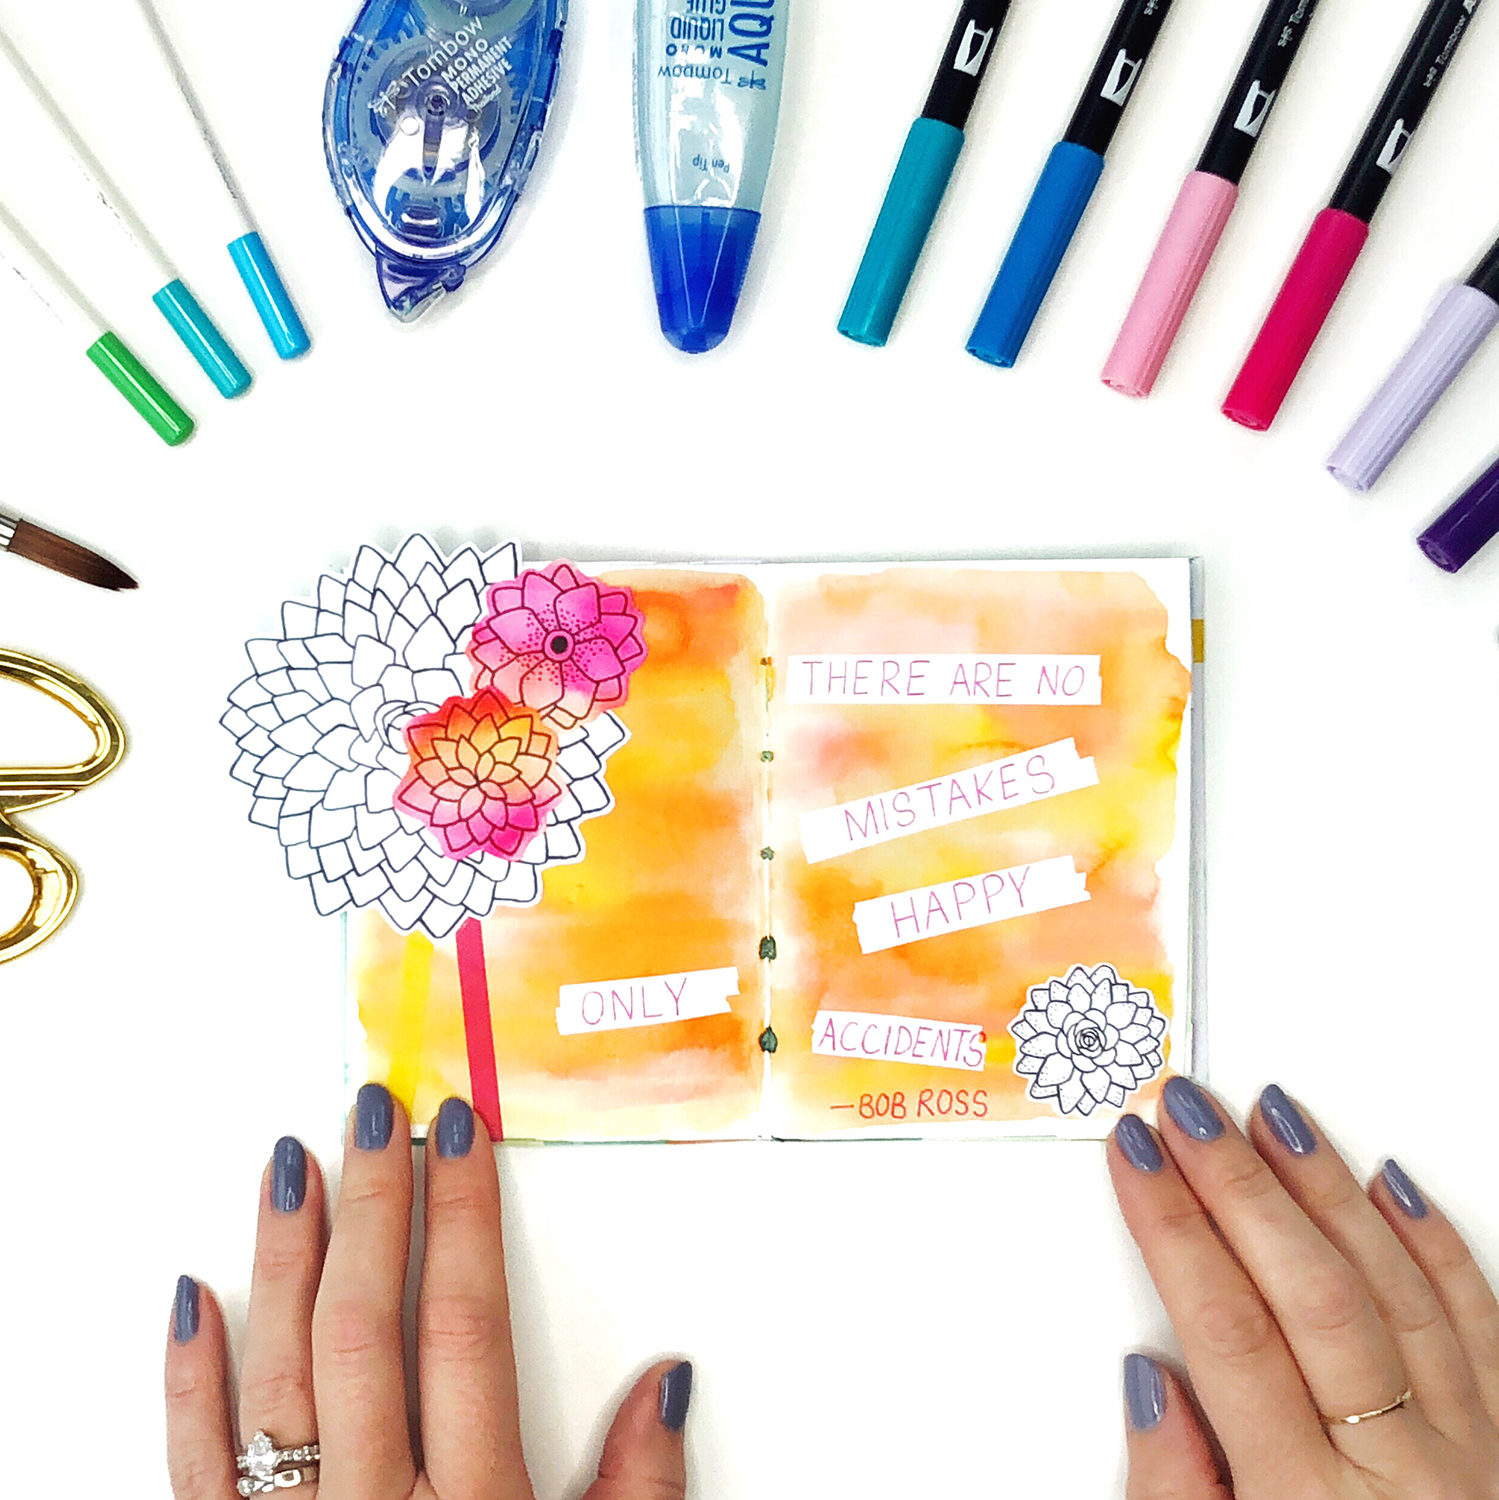 How to make a tiny art journal kit & create art every day